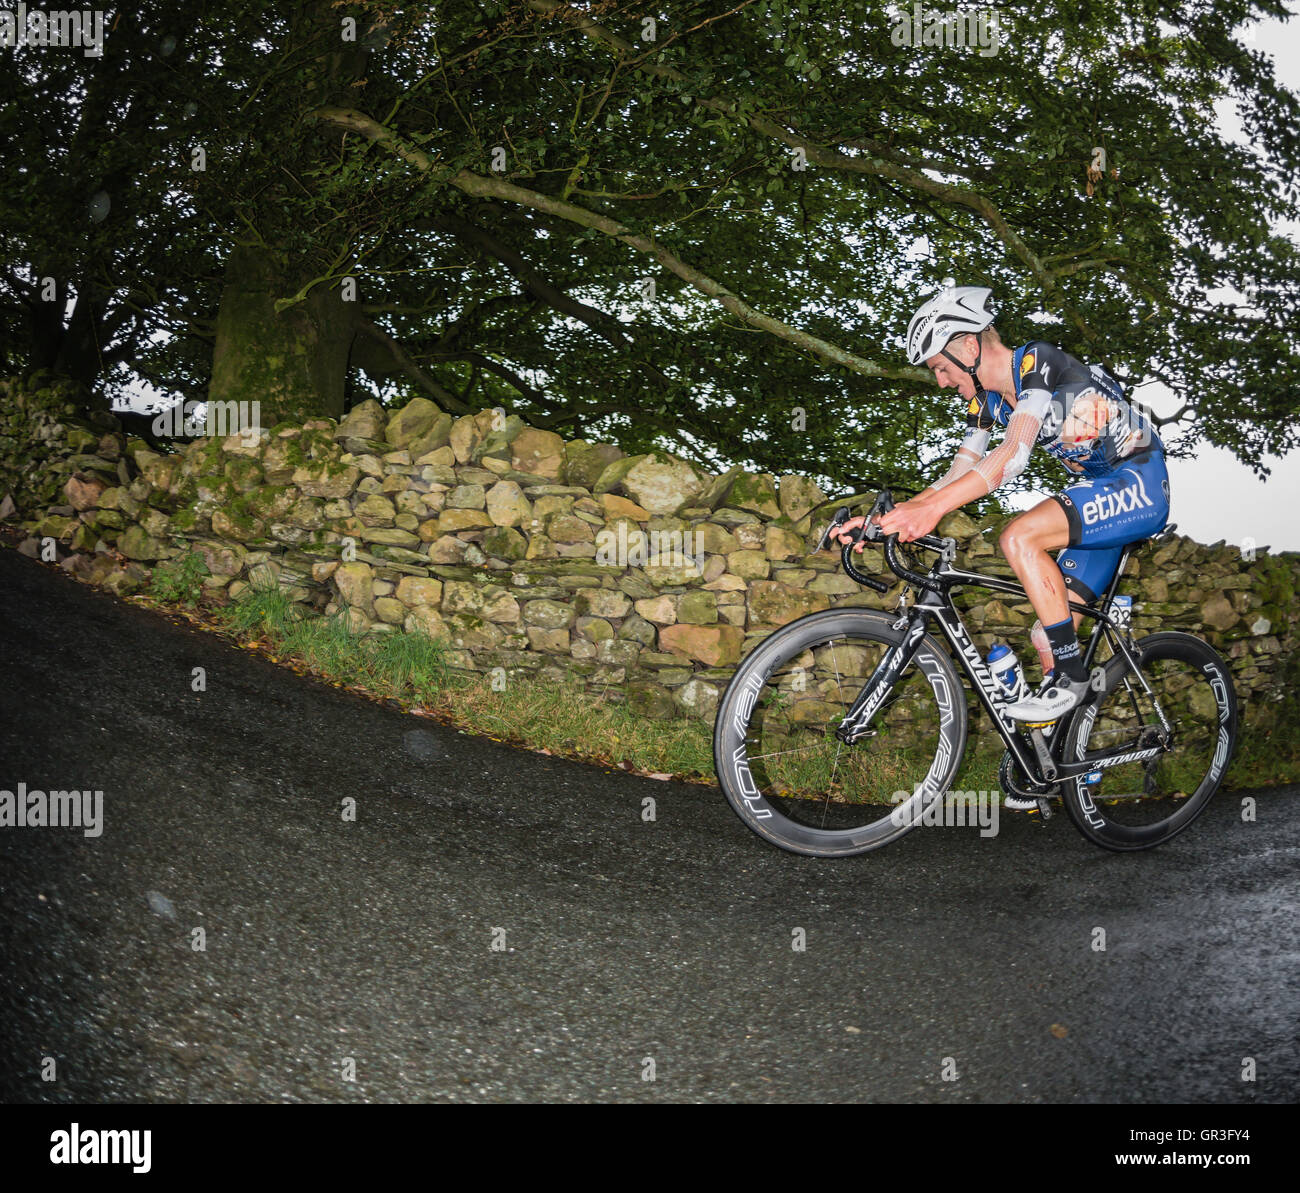 An injured Adrien Costa, Etixx-quick-step, climbing the Struggle on the second stage of the 2016 Tour of Britain cycle race. Stock Photo